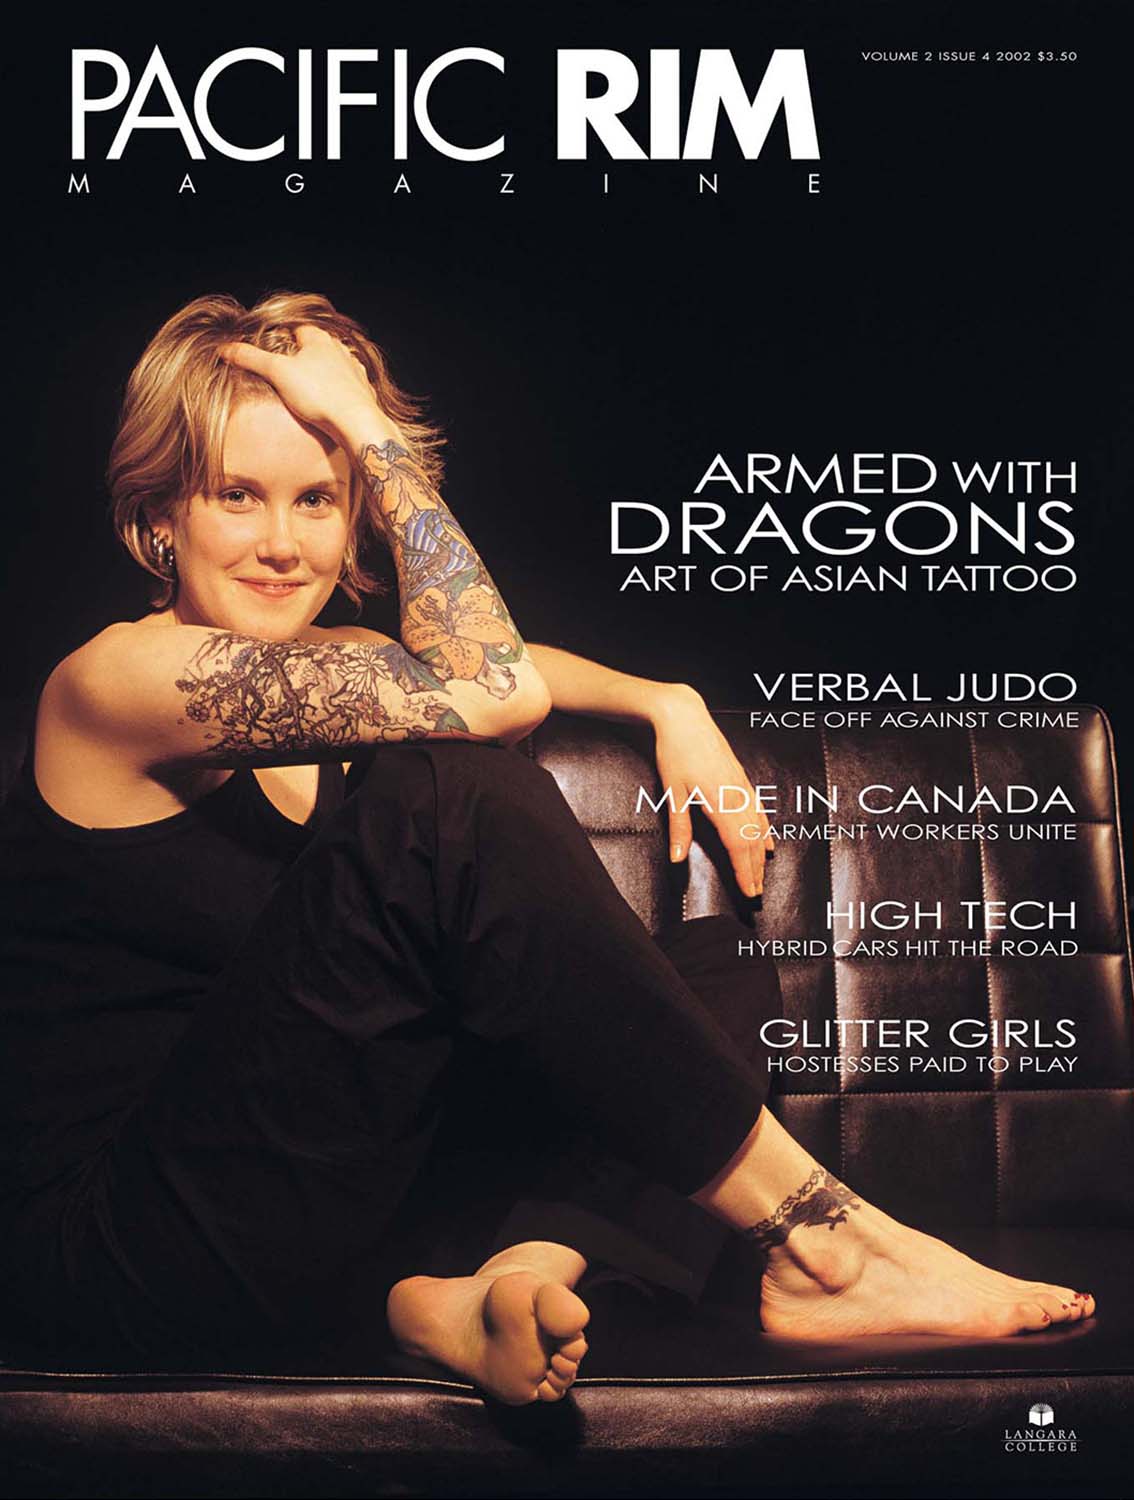 2002 Pacific Rim Cover. "Armed with Dragons." Cover Story. Image of woman with tattooed arm.